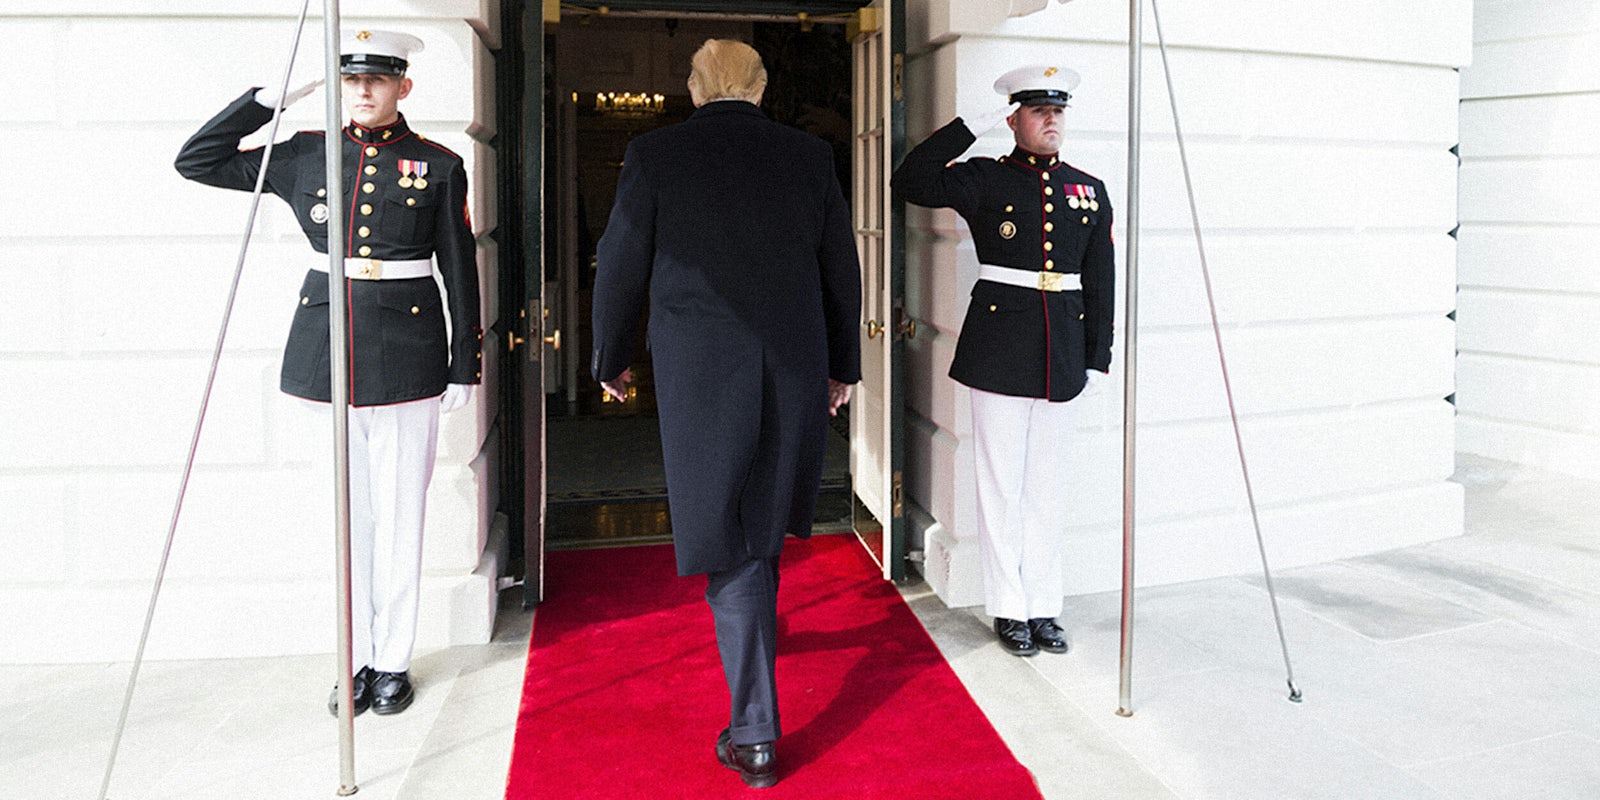 Donald Trump flanked by US Marines as he enters the White House